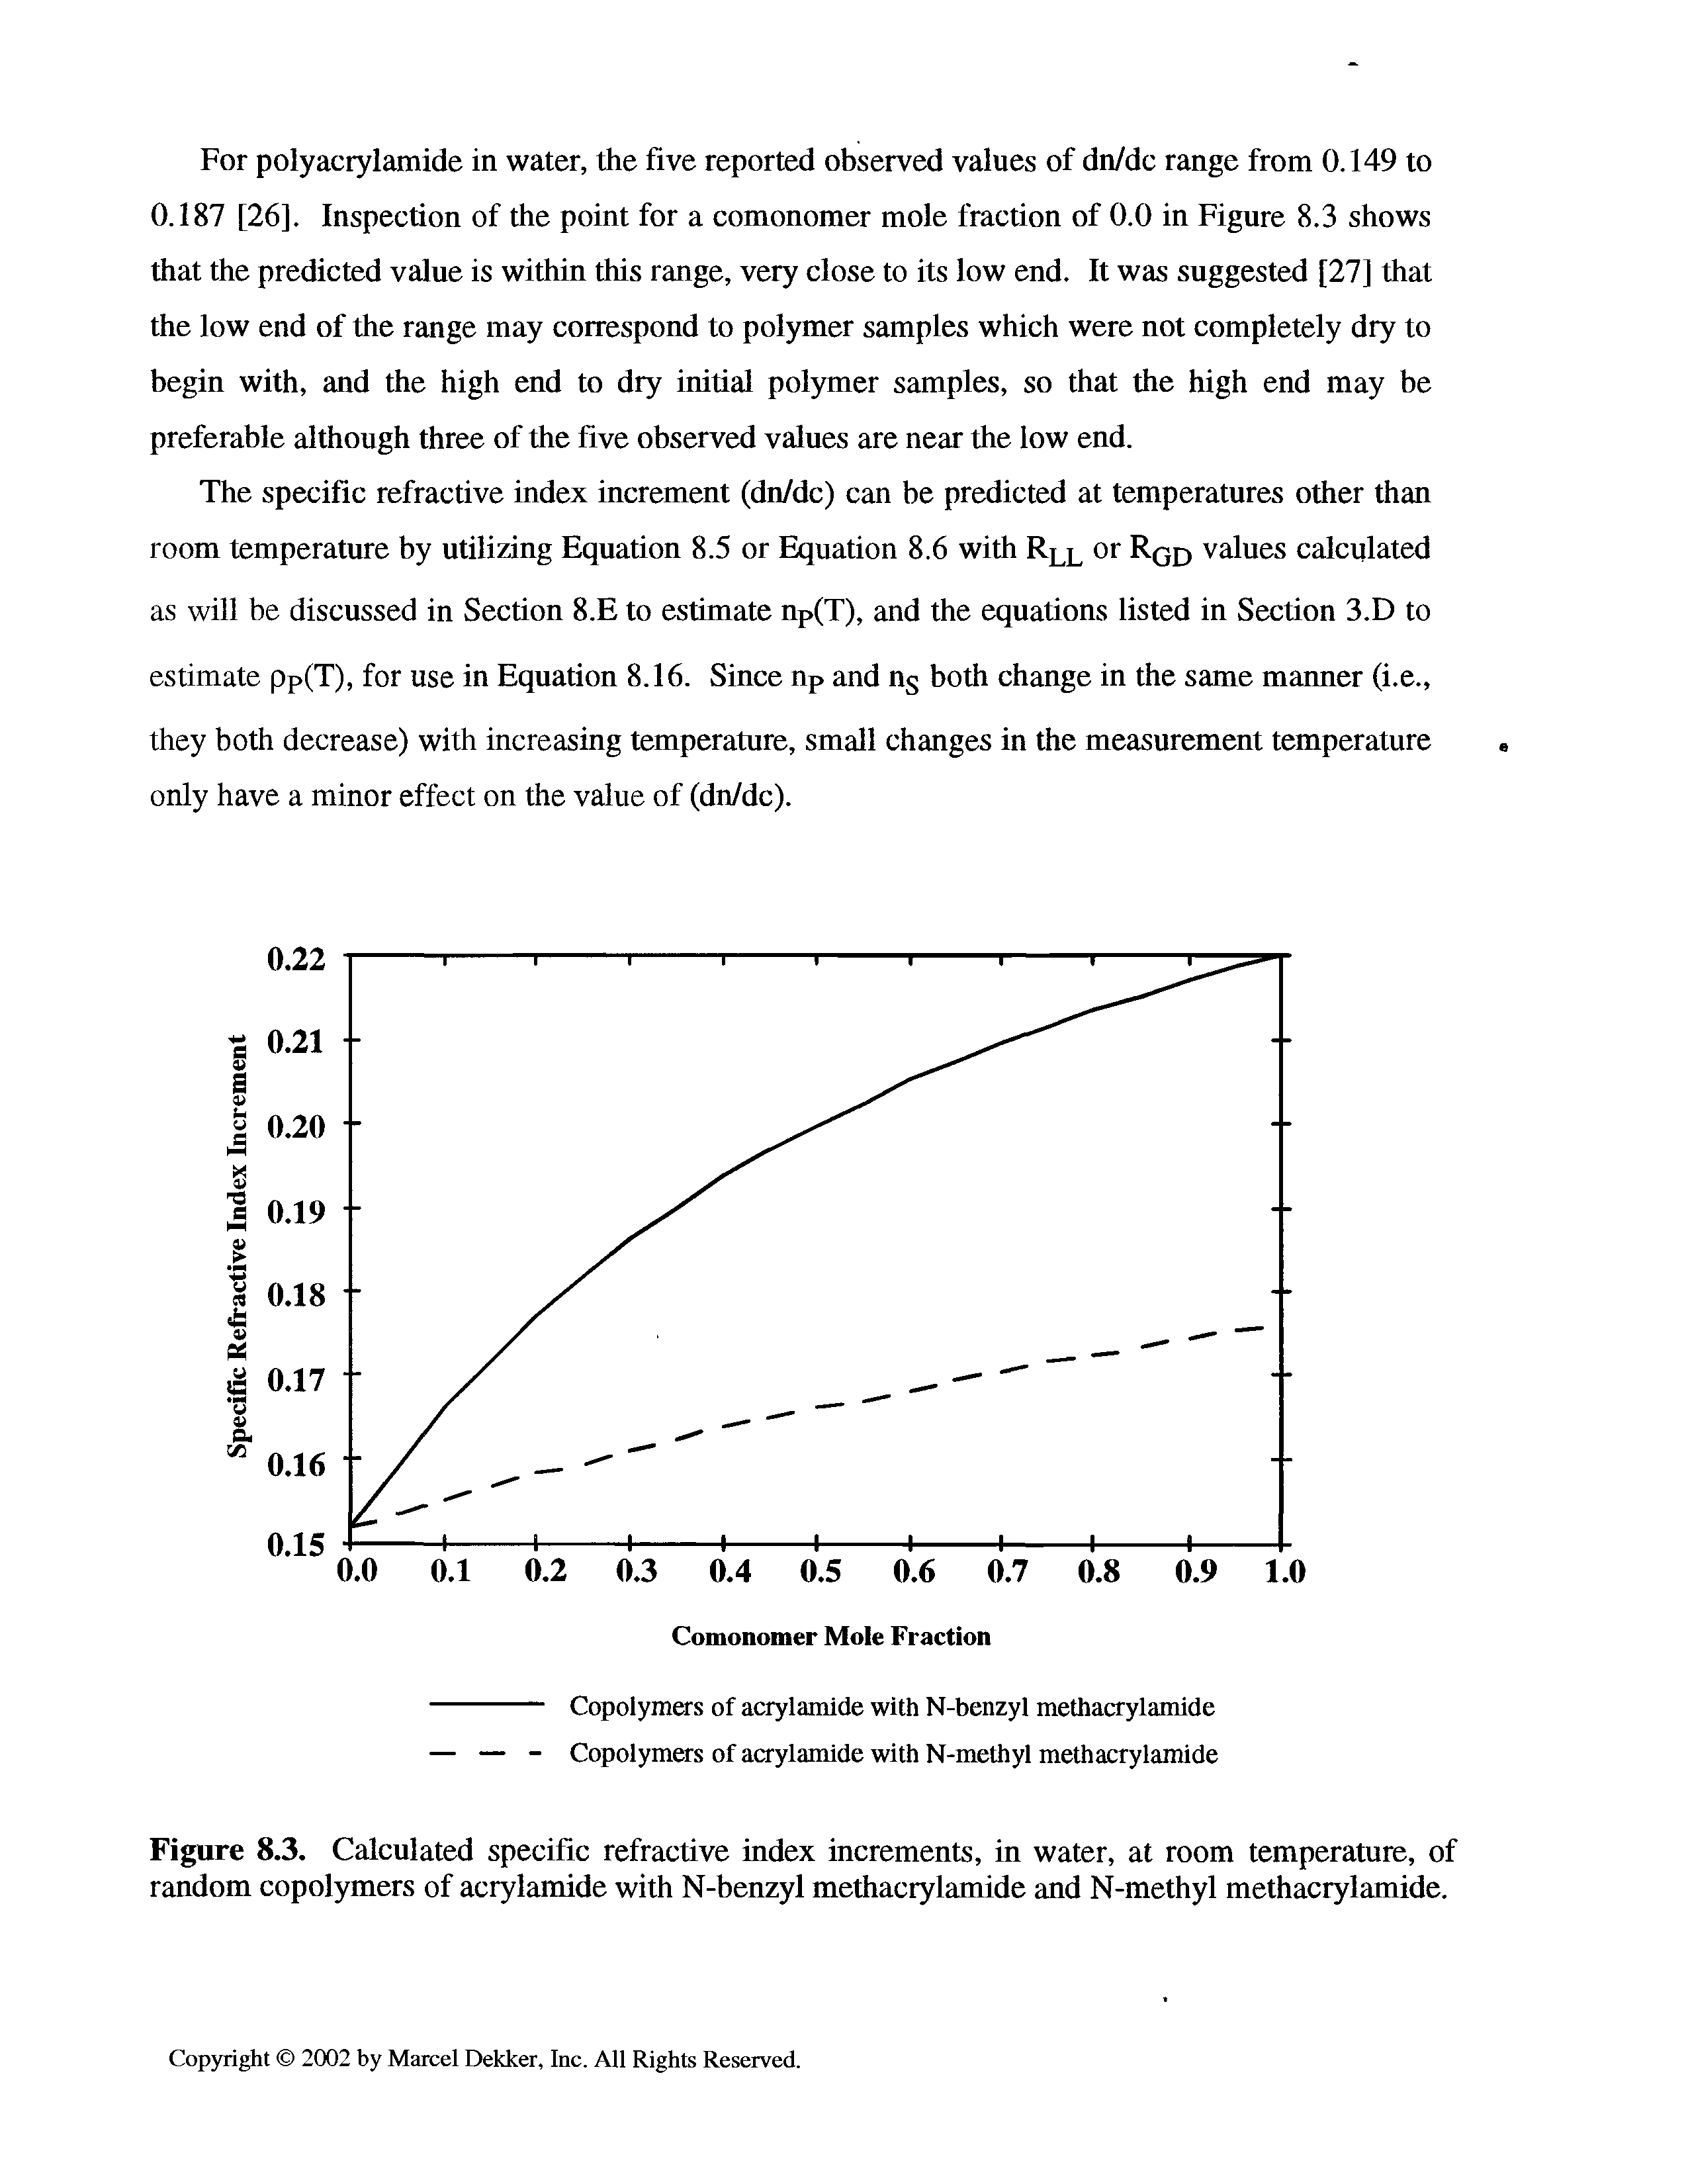 Figure 8.3. Calculated specific refractive index increments, in water, at room temperature, of random copolymers of acrylamide with N-benzyl methacrylamide and N-methyl methacrylamide.